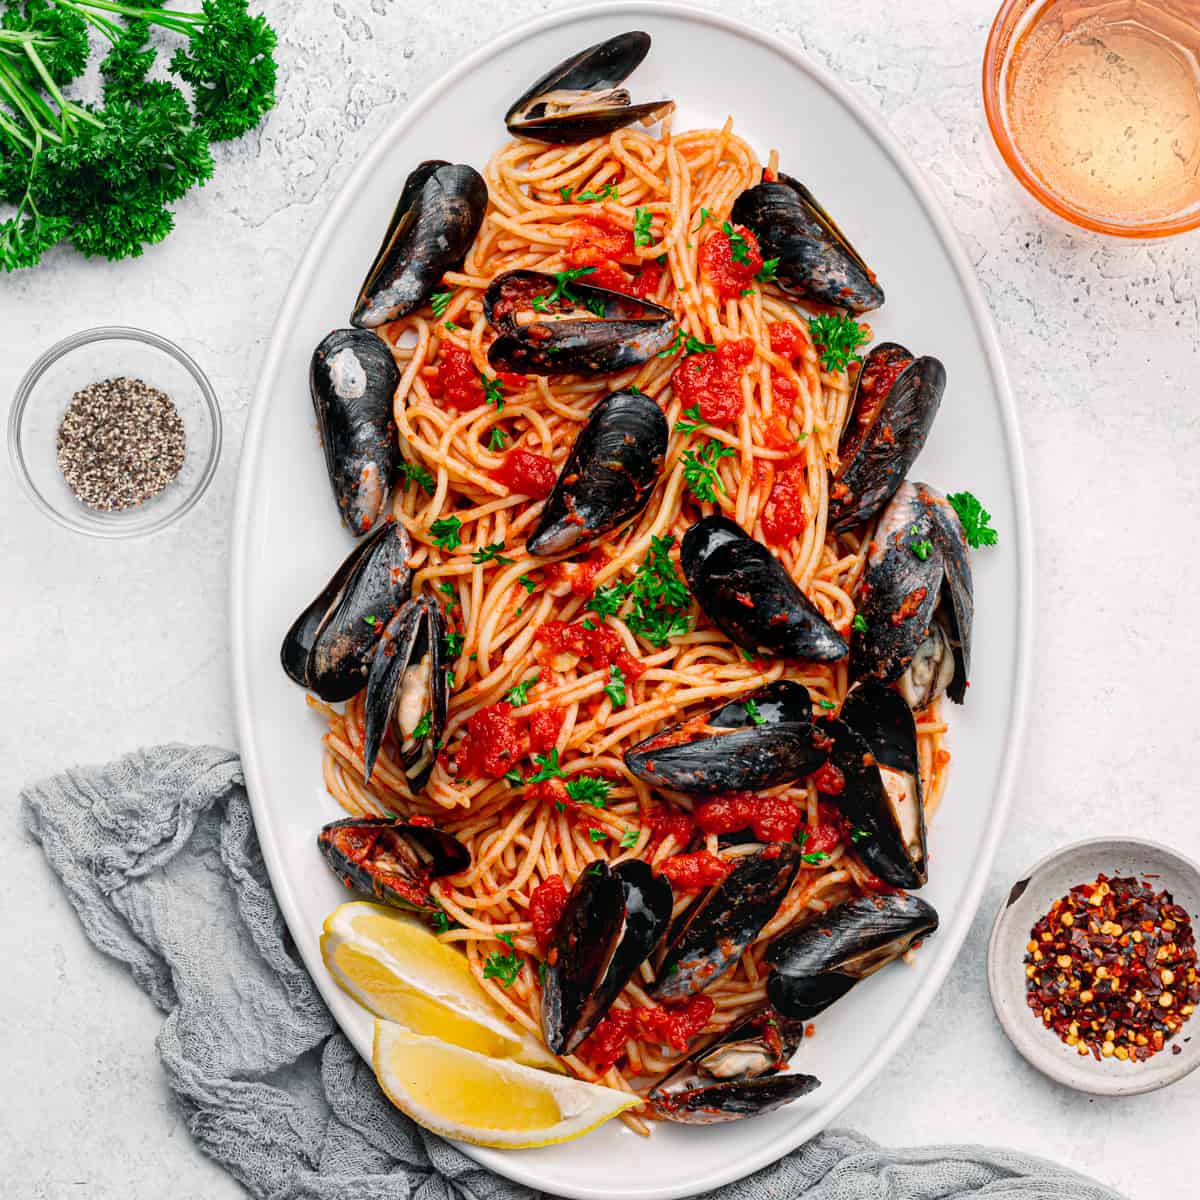 How to cook mussels with pasta.